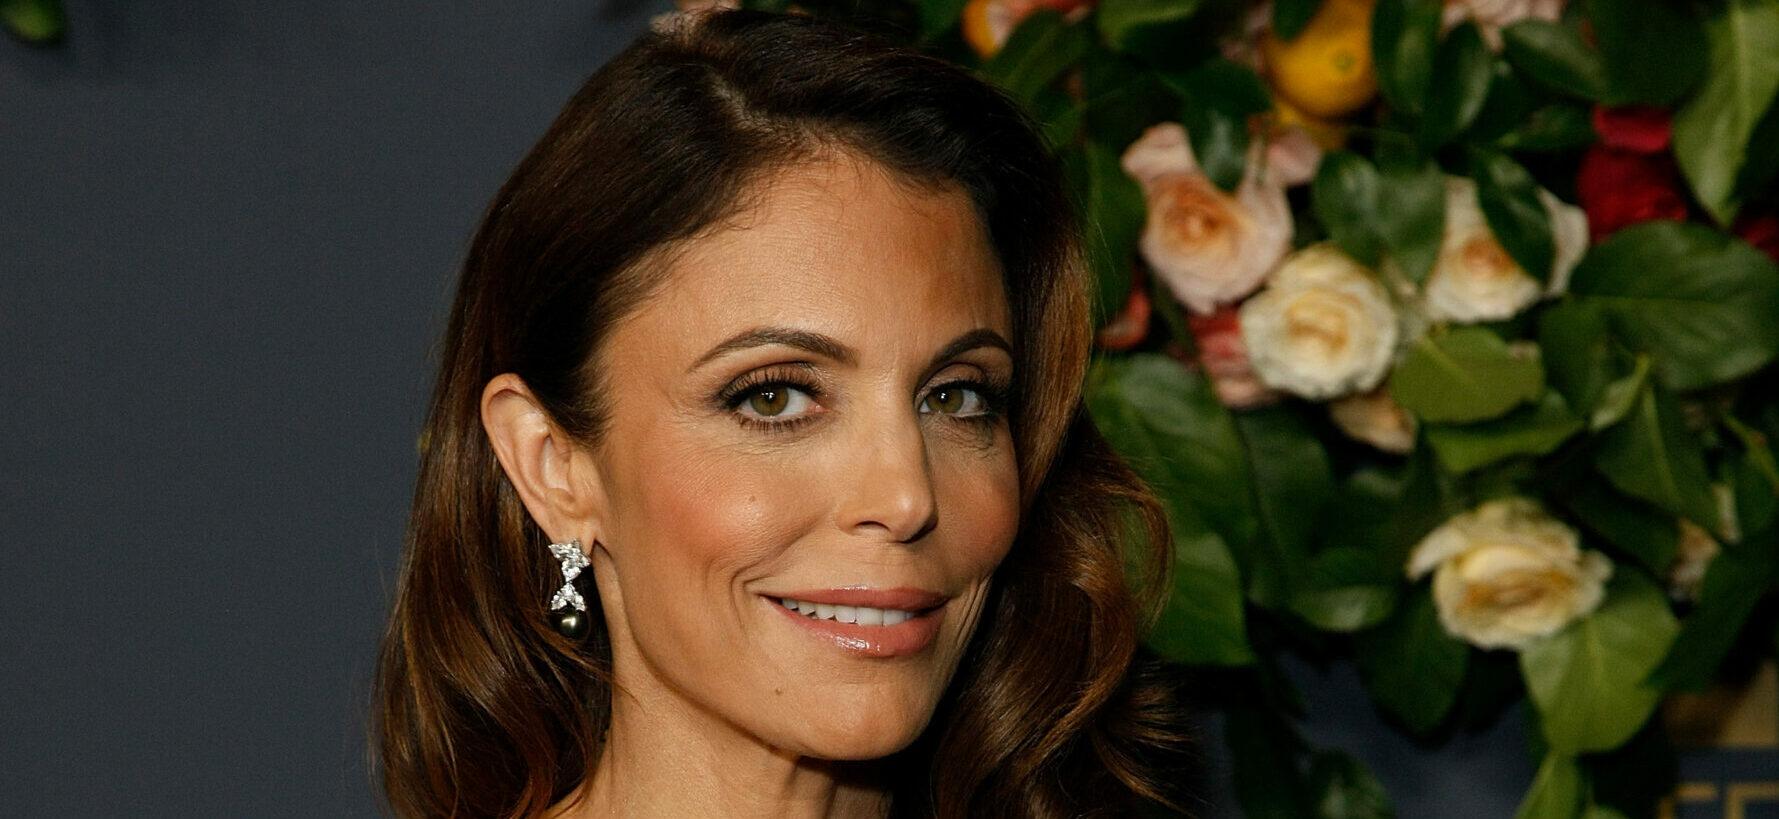 Bethenny Frankel Shares Her UNIQUE Secret To Staying Fit And Looking Young At 51